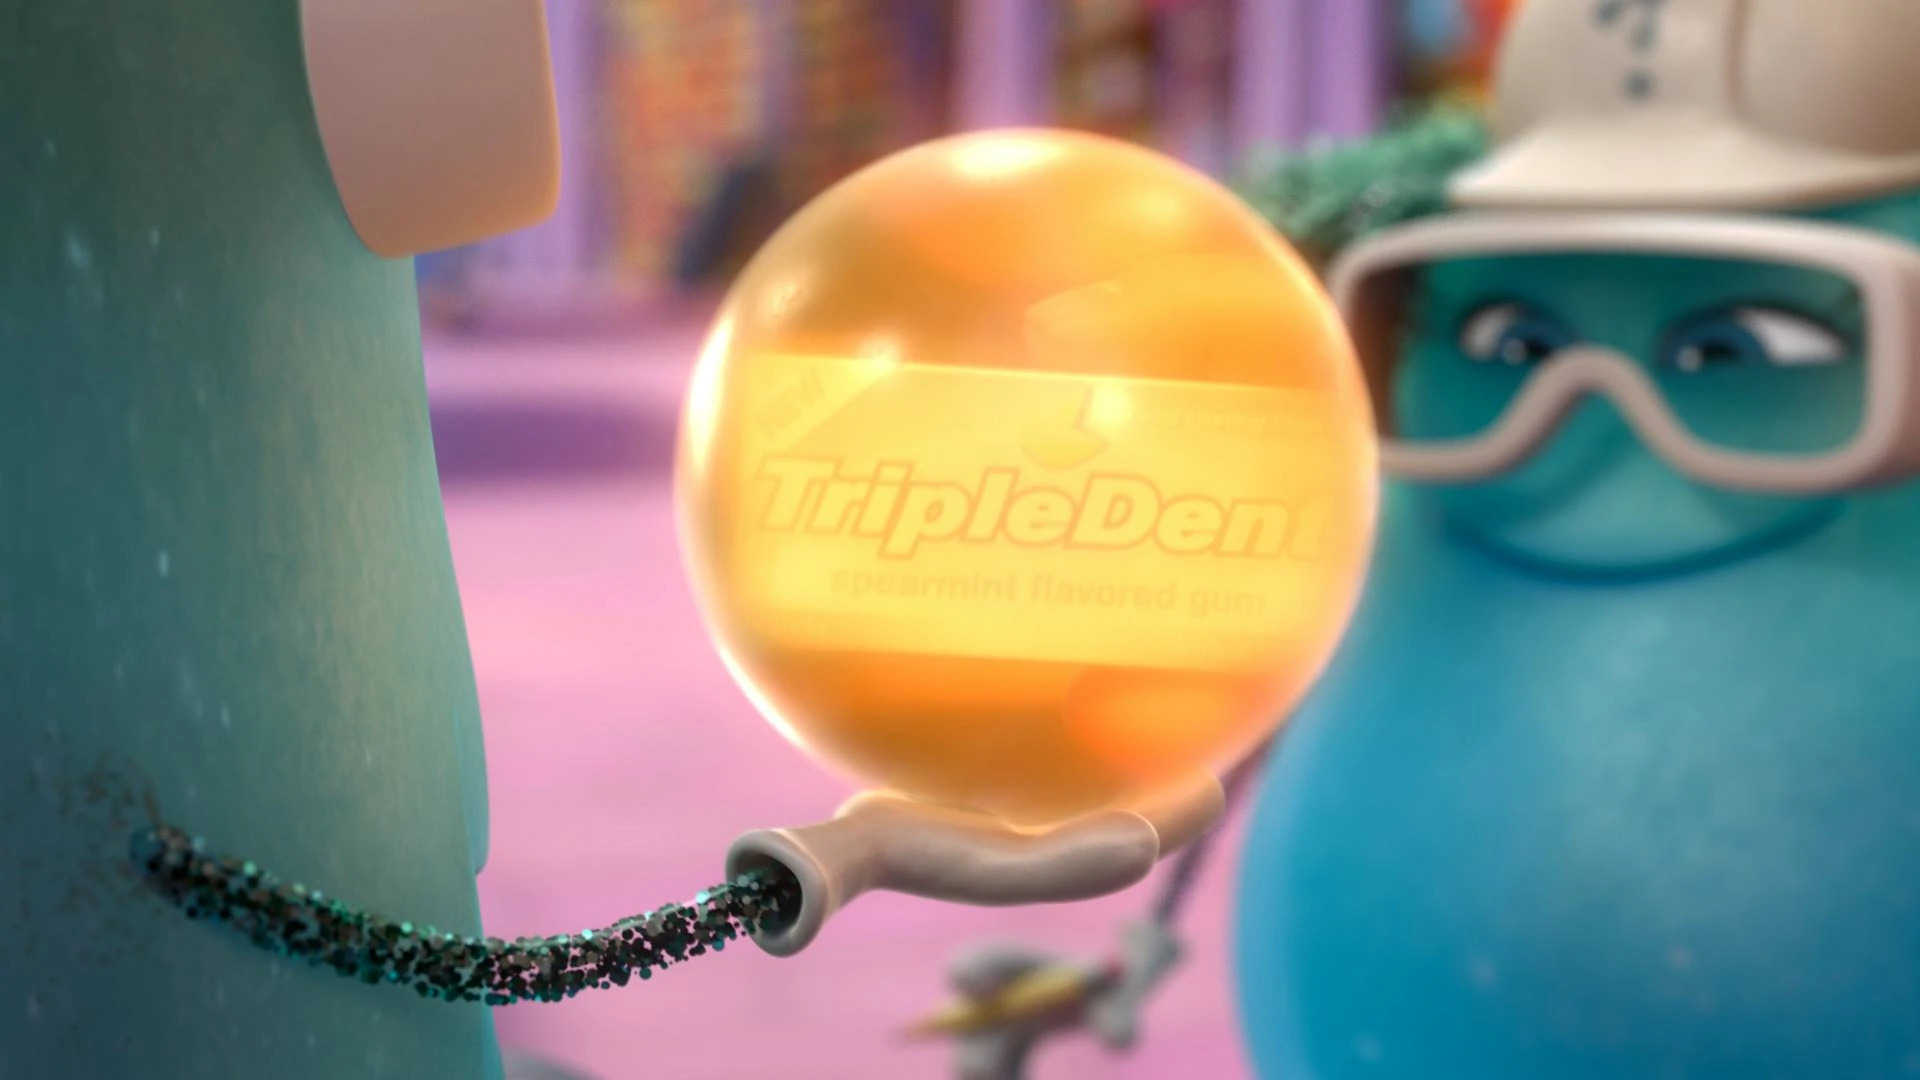 Image of Triple Dent Chewing Gum from Pixar's Inside Out